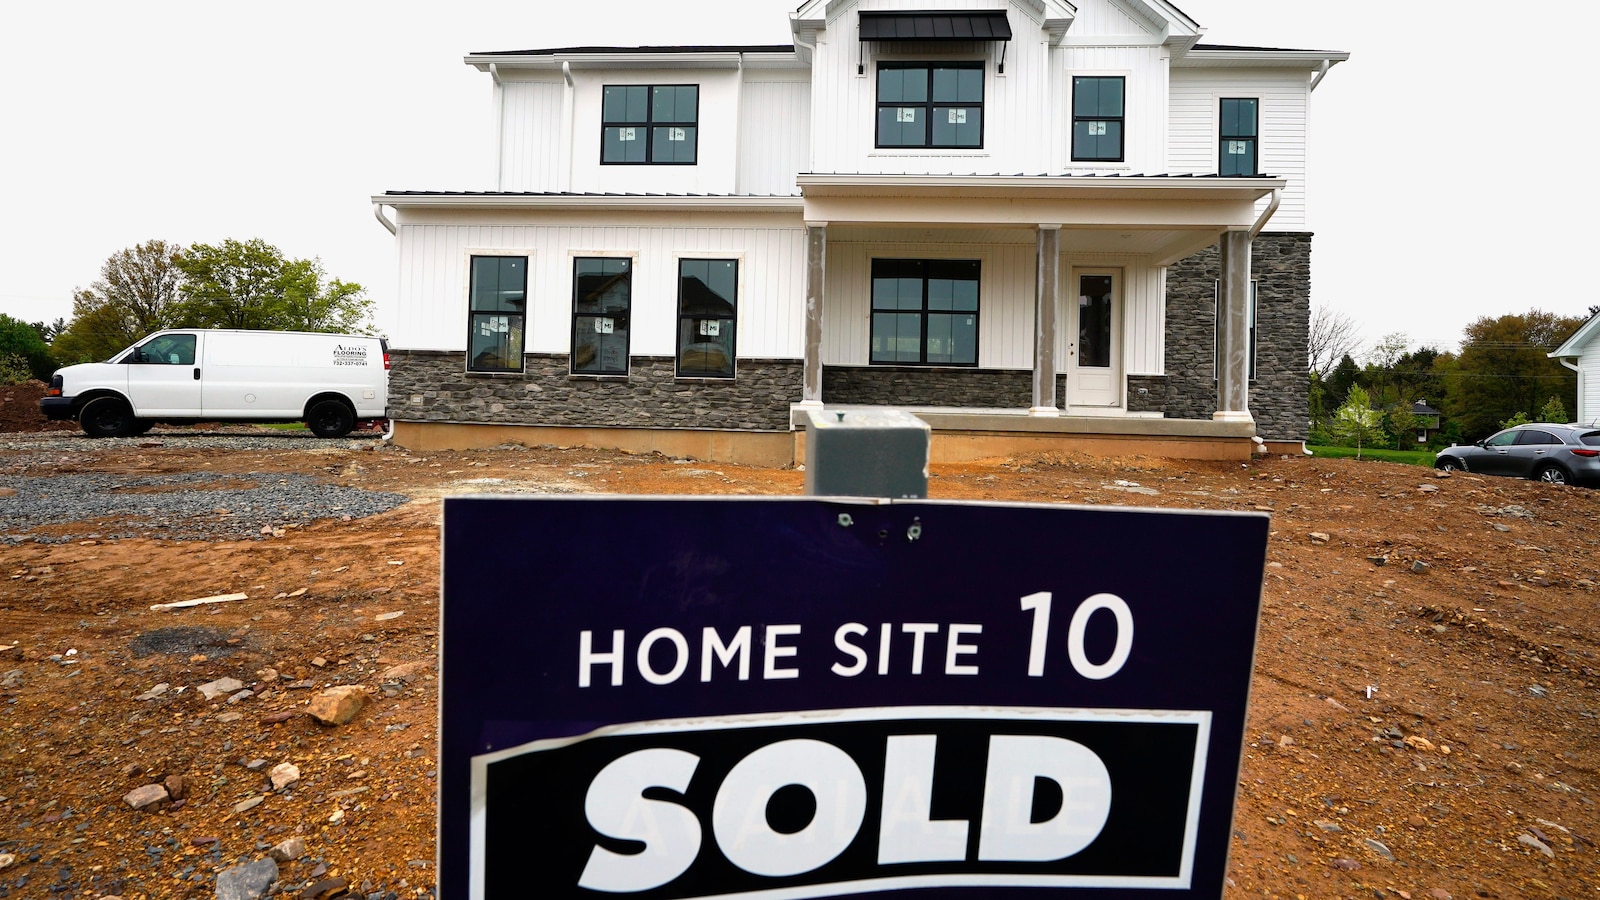 The reasons behind voter frustration with the US economy: A focus on home prices